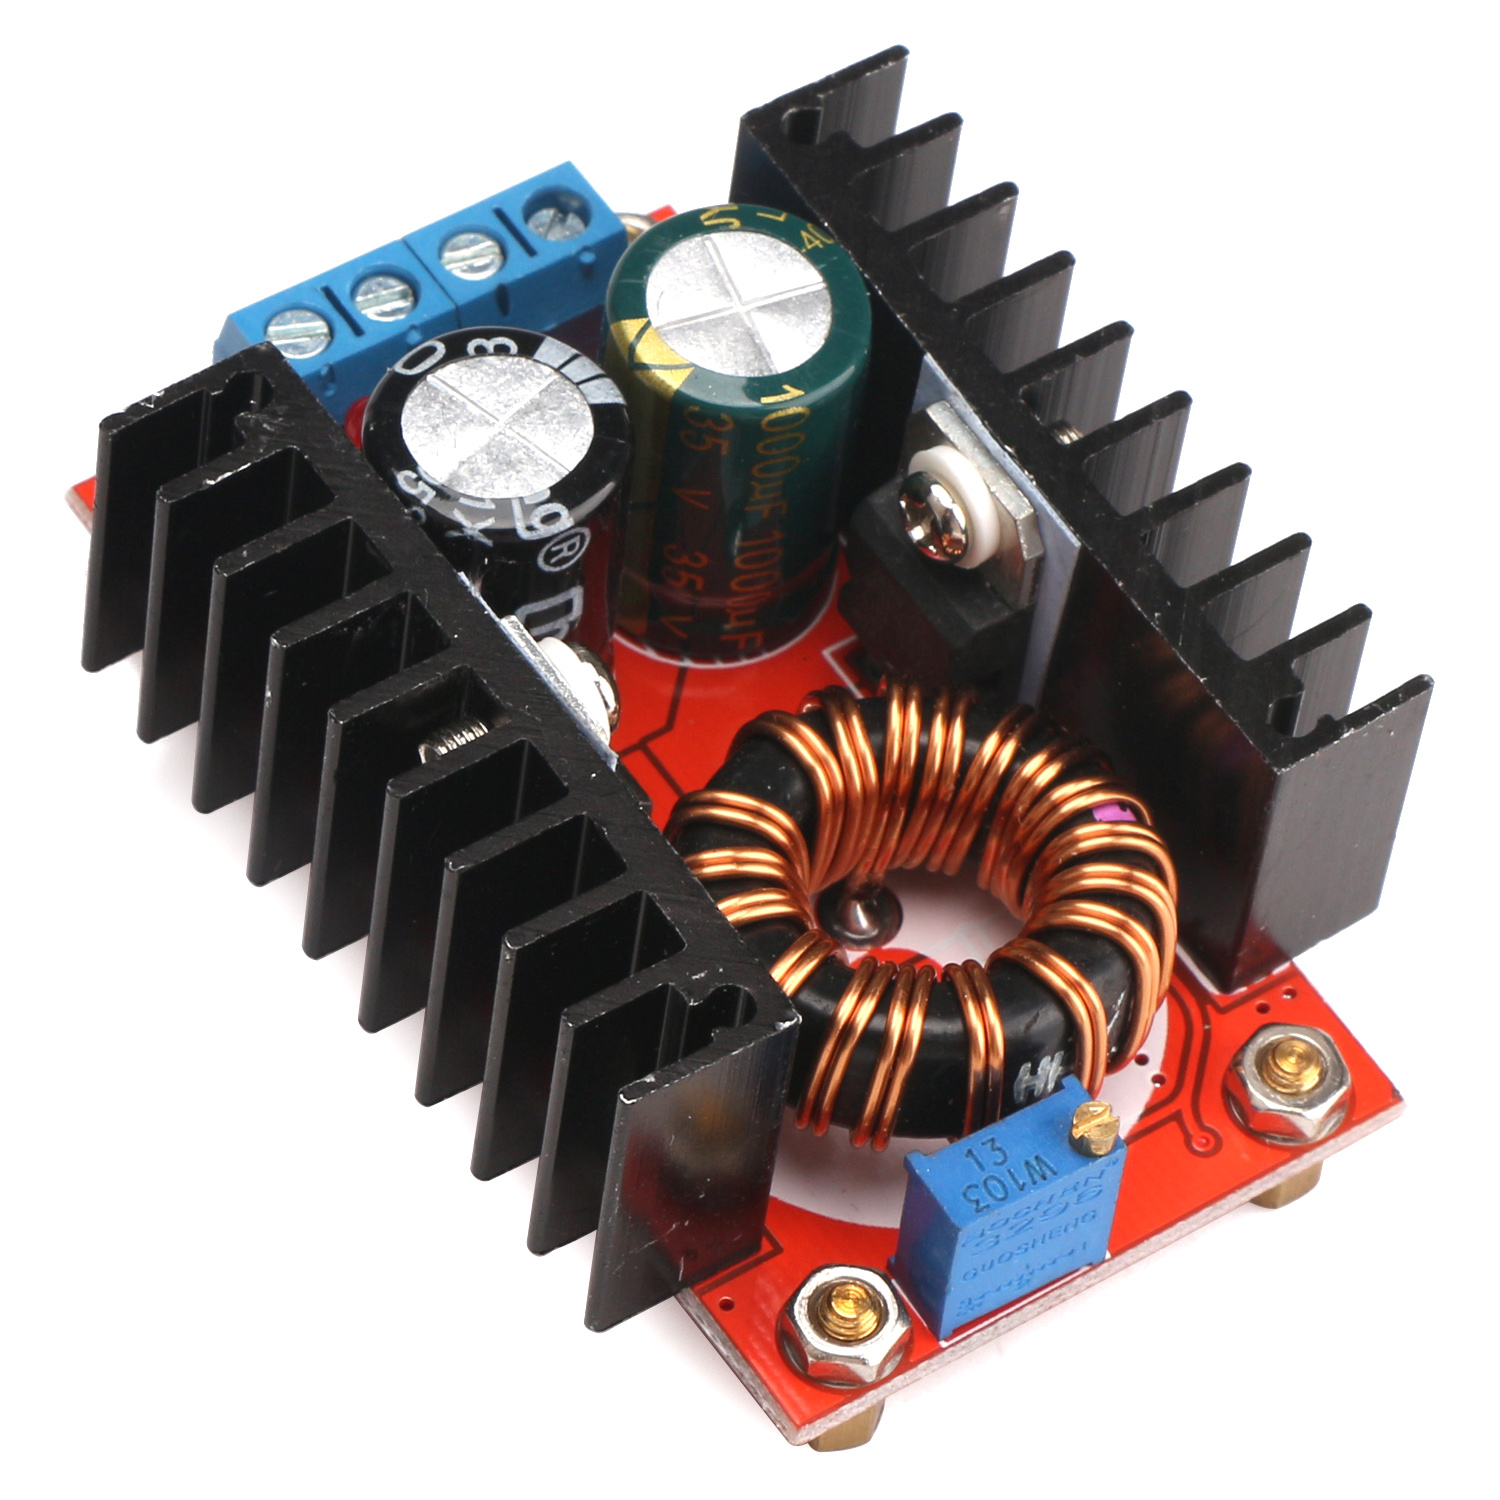 DC-DC Converter Boost Power Supply Module 10-32V Step up to 35-60V 120W Voltage 